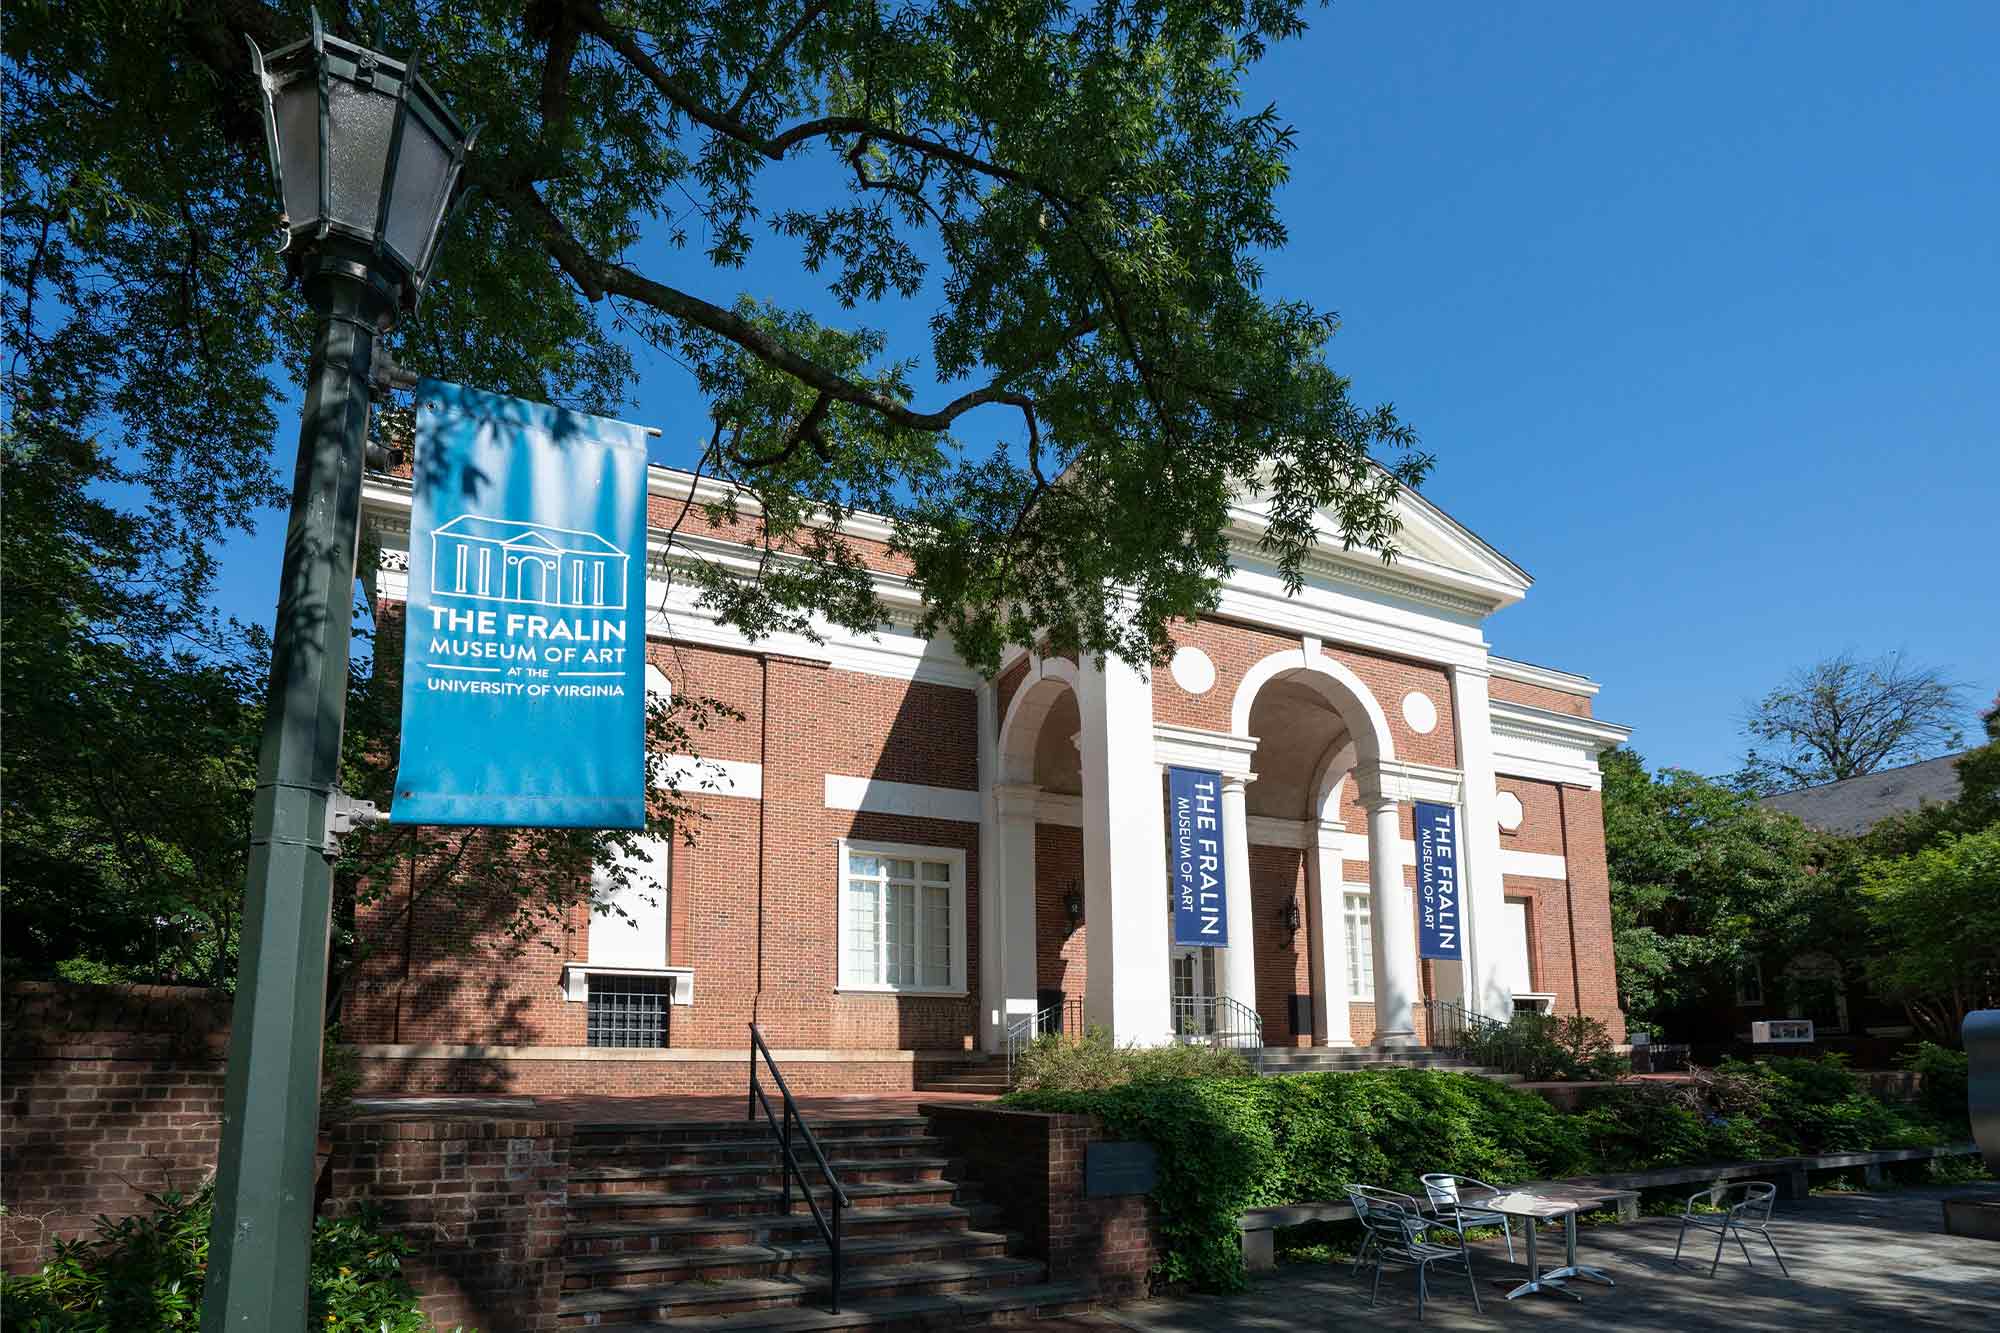 Exterior photo of The Fralin Museum. A light post in the foreground displays a banner that reads "The Fralin Museum of Art at the University of Virginia"